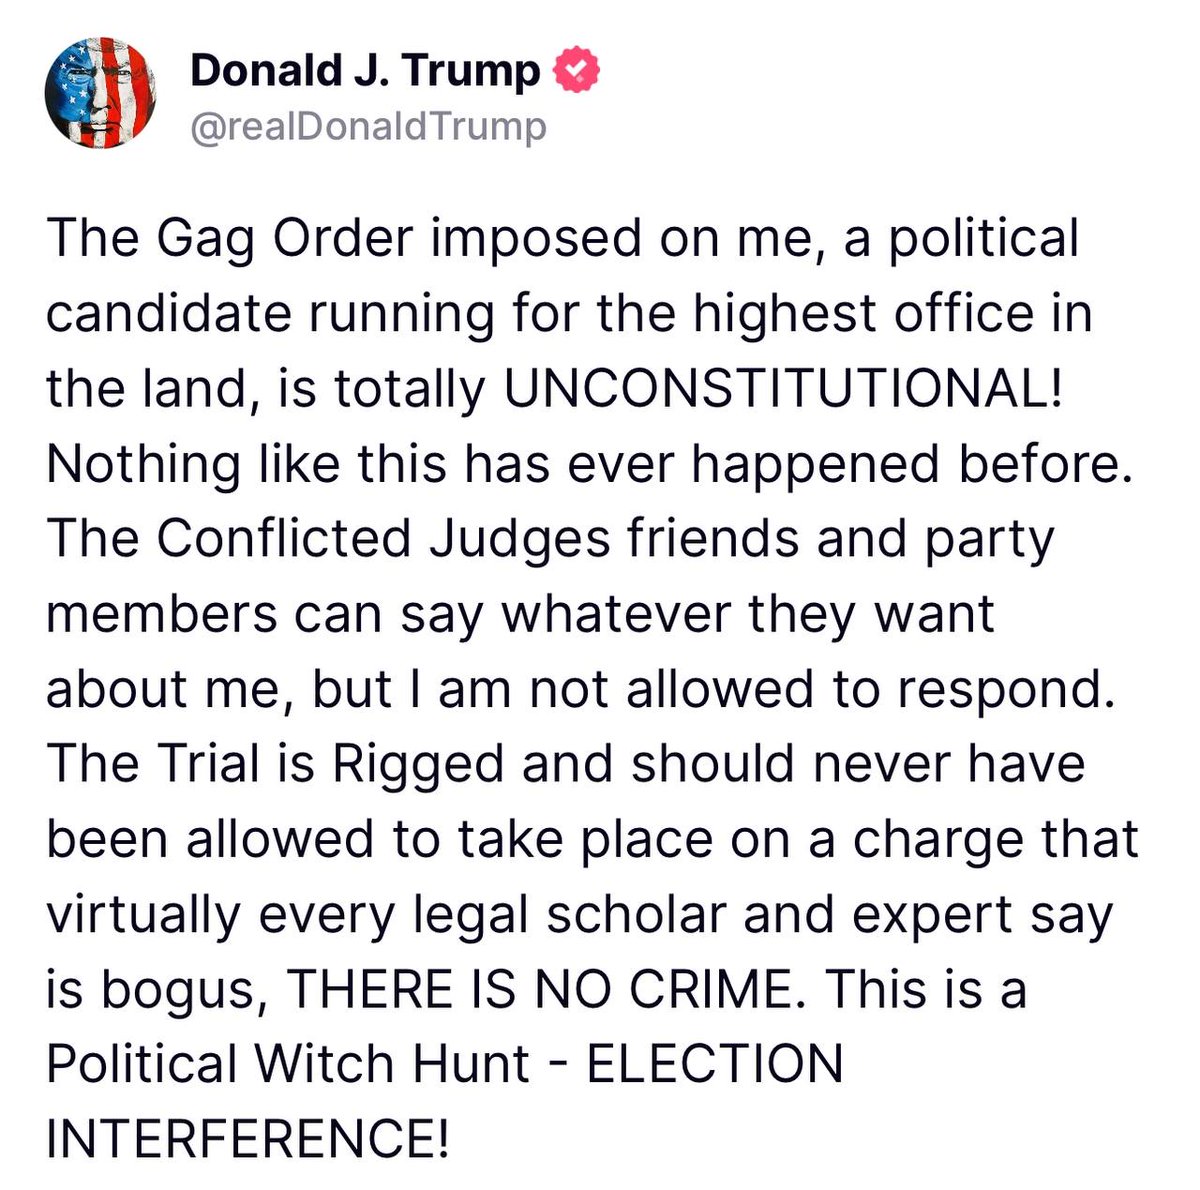 🇺🇸TRUMP COMPLAINS ABOUT GAG ORDER ON TRUTHSOCIAL... HUSH MONEY TRIAL OFF TODAY Doesn't this break the gag order? 'The Gag Order imposed on me, a political candidate running for the highest office in the land, is totally UNCONSTITUTIONAL! Nothing like this has ever happened…